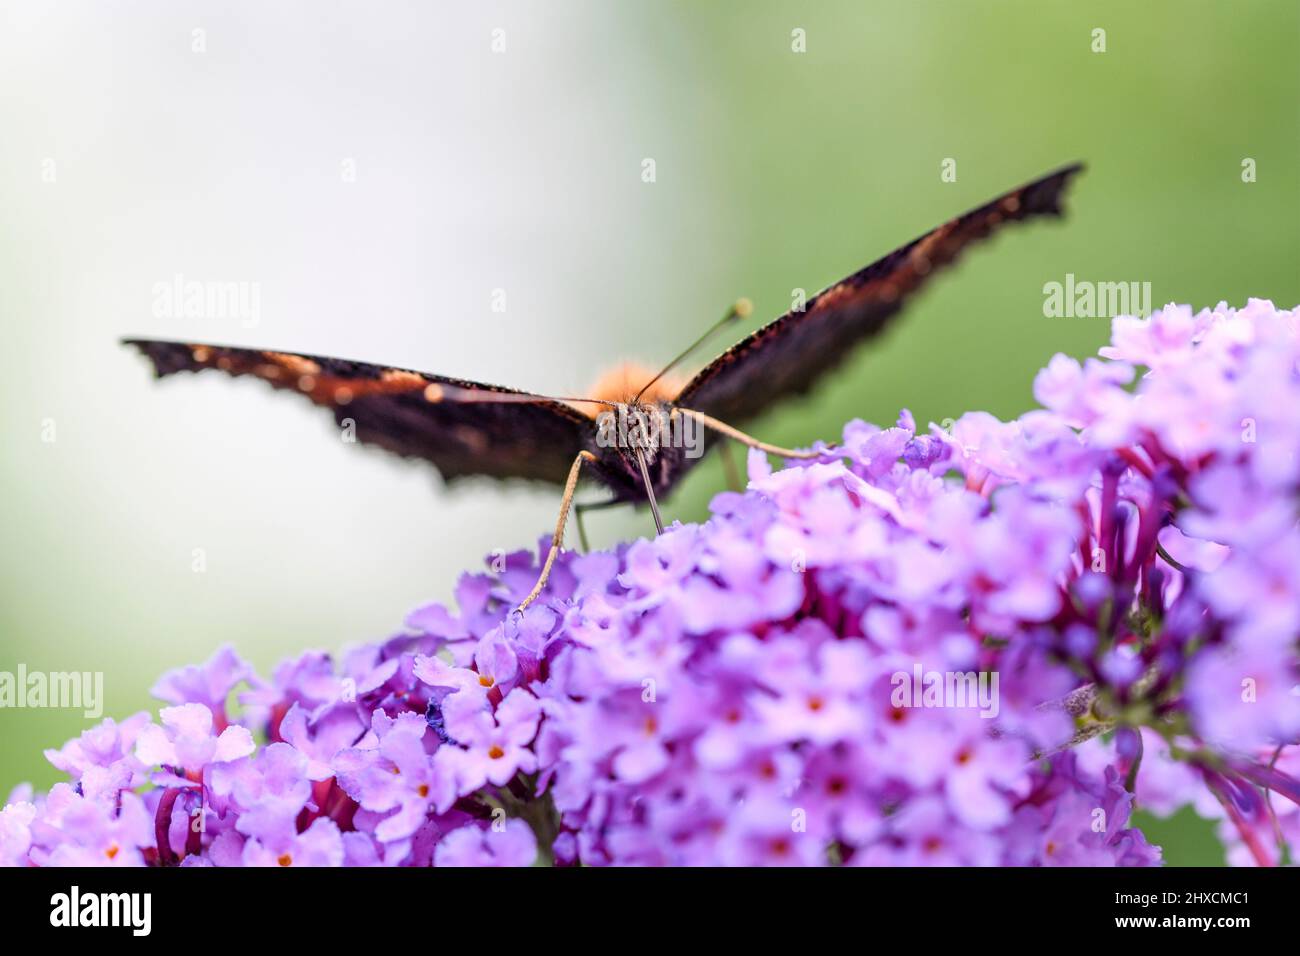 Aglais urticae, Small fox, Butterfly, Nymphalidae, Noble butterfly Stock Photo